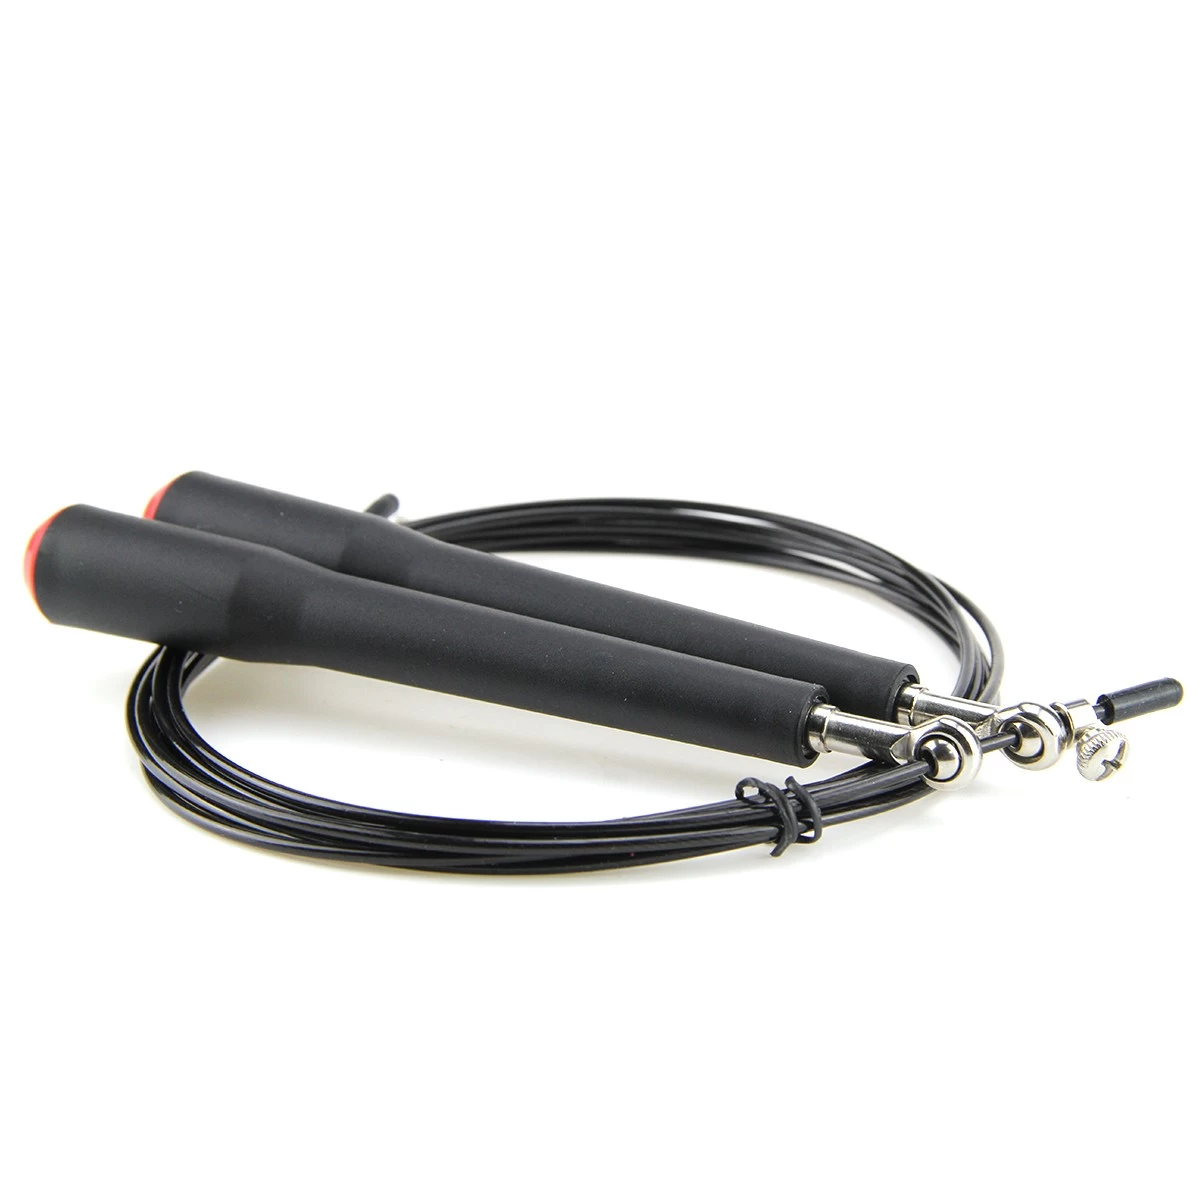 Plastic Speed Jump Rope for MMA Boxing Skipping Fitness